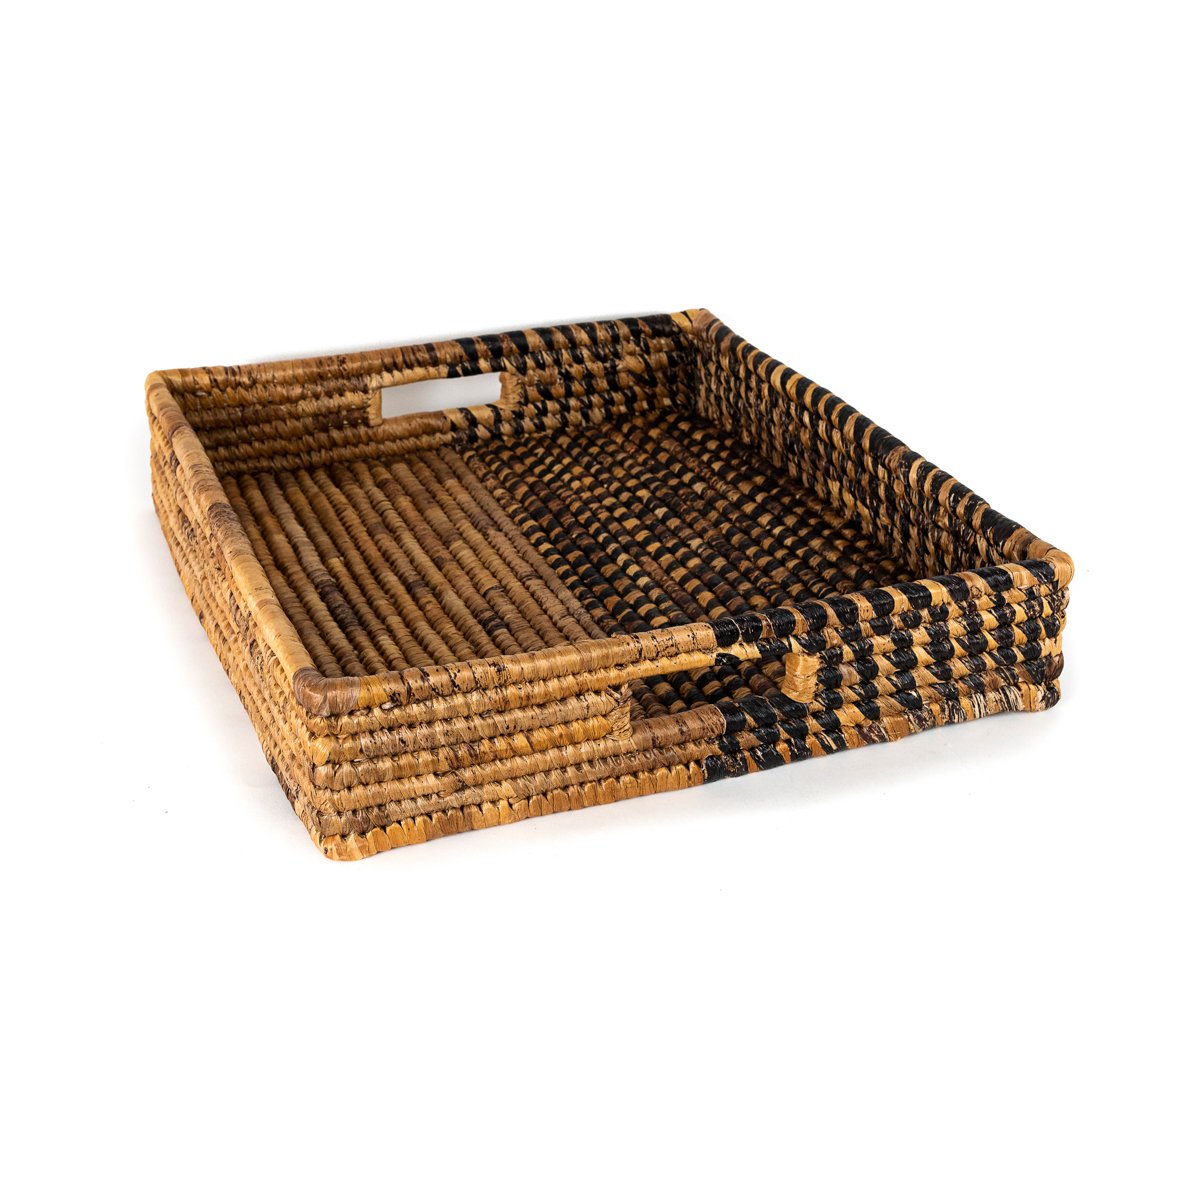 Unique hand woven basket made in Rwanda with black diamond pattern. This is apart of the Akaneri basket design.